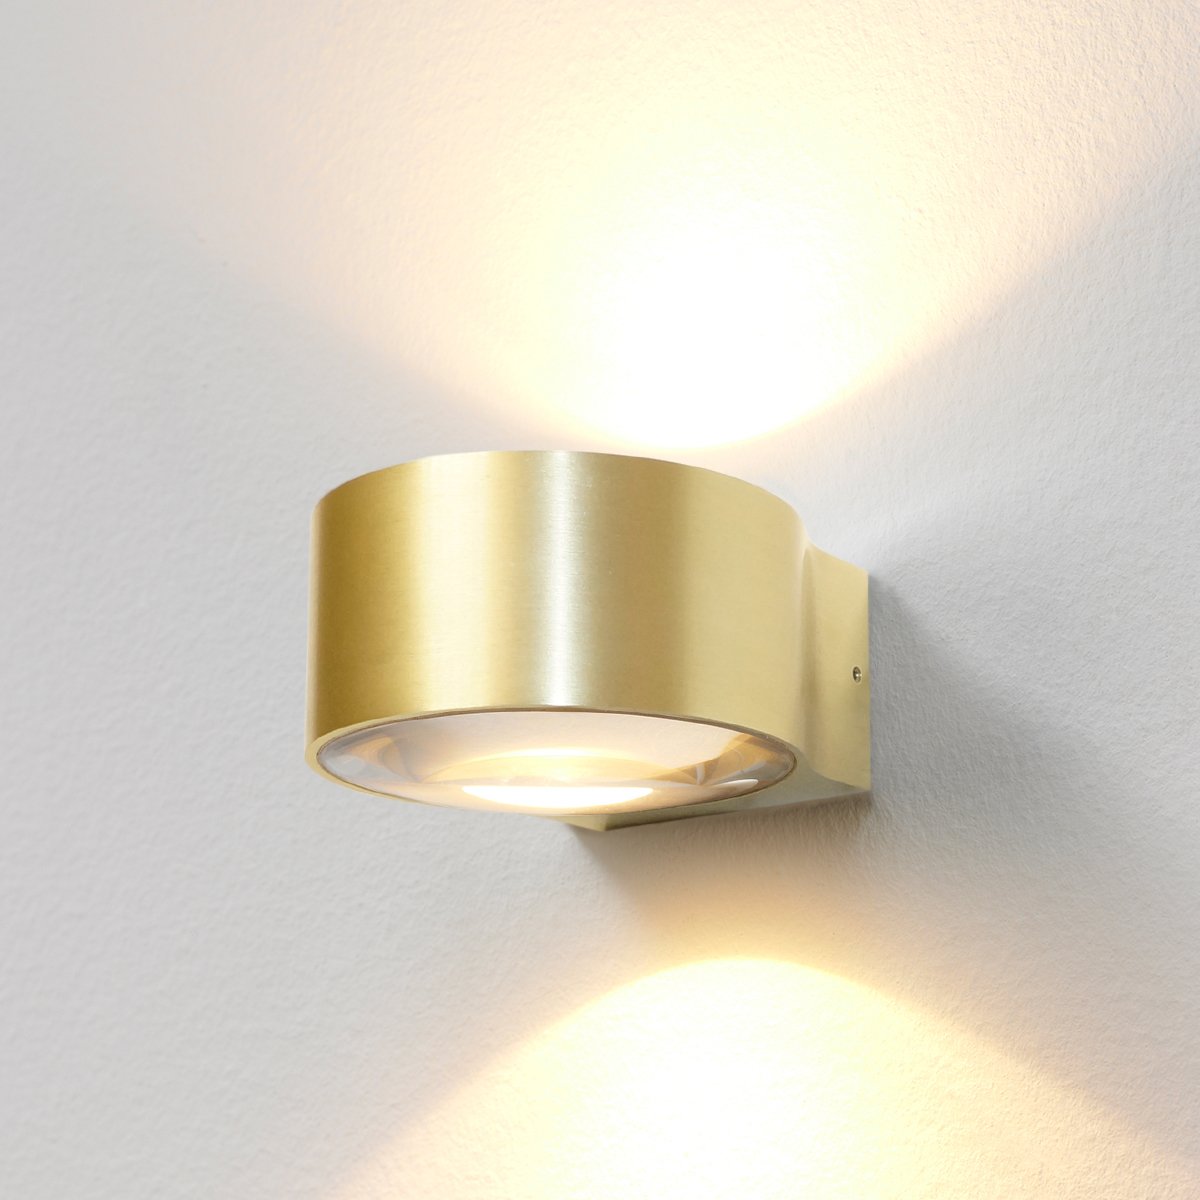 Wall lamp round up down gold Bardi - 6.5 cm